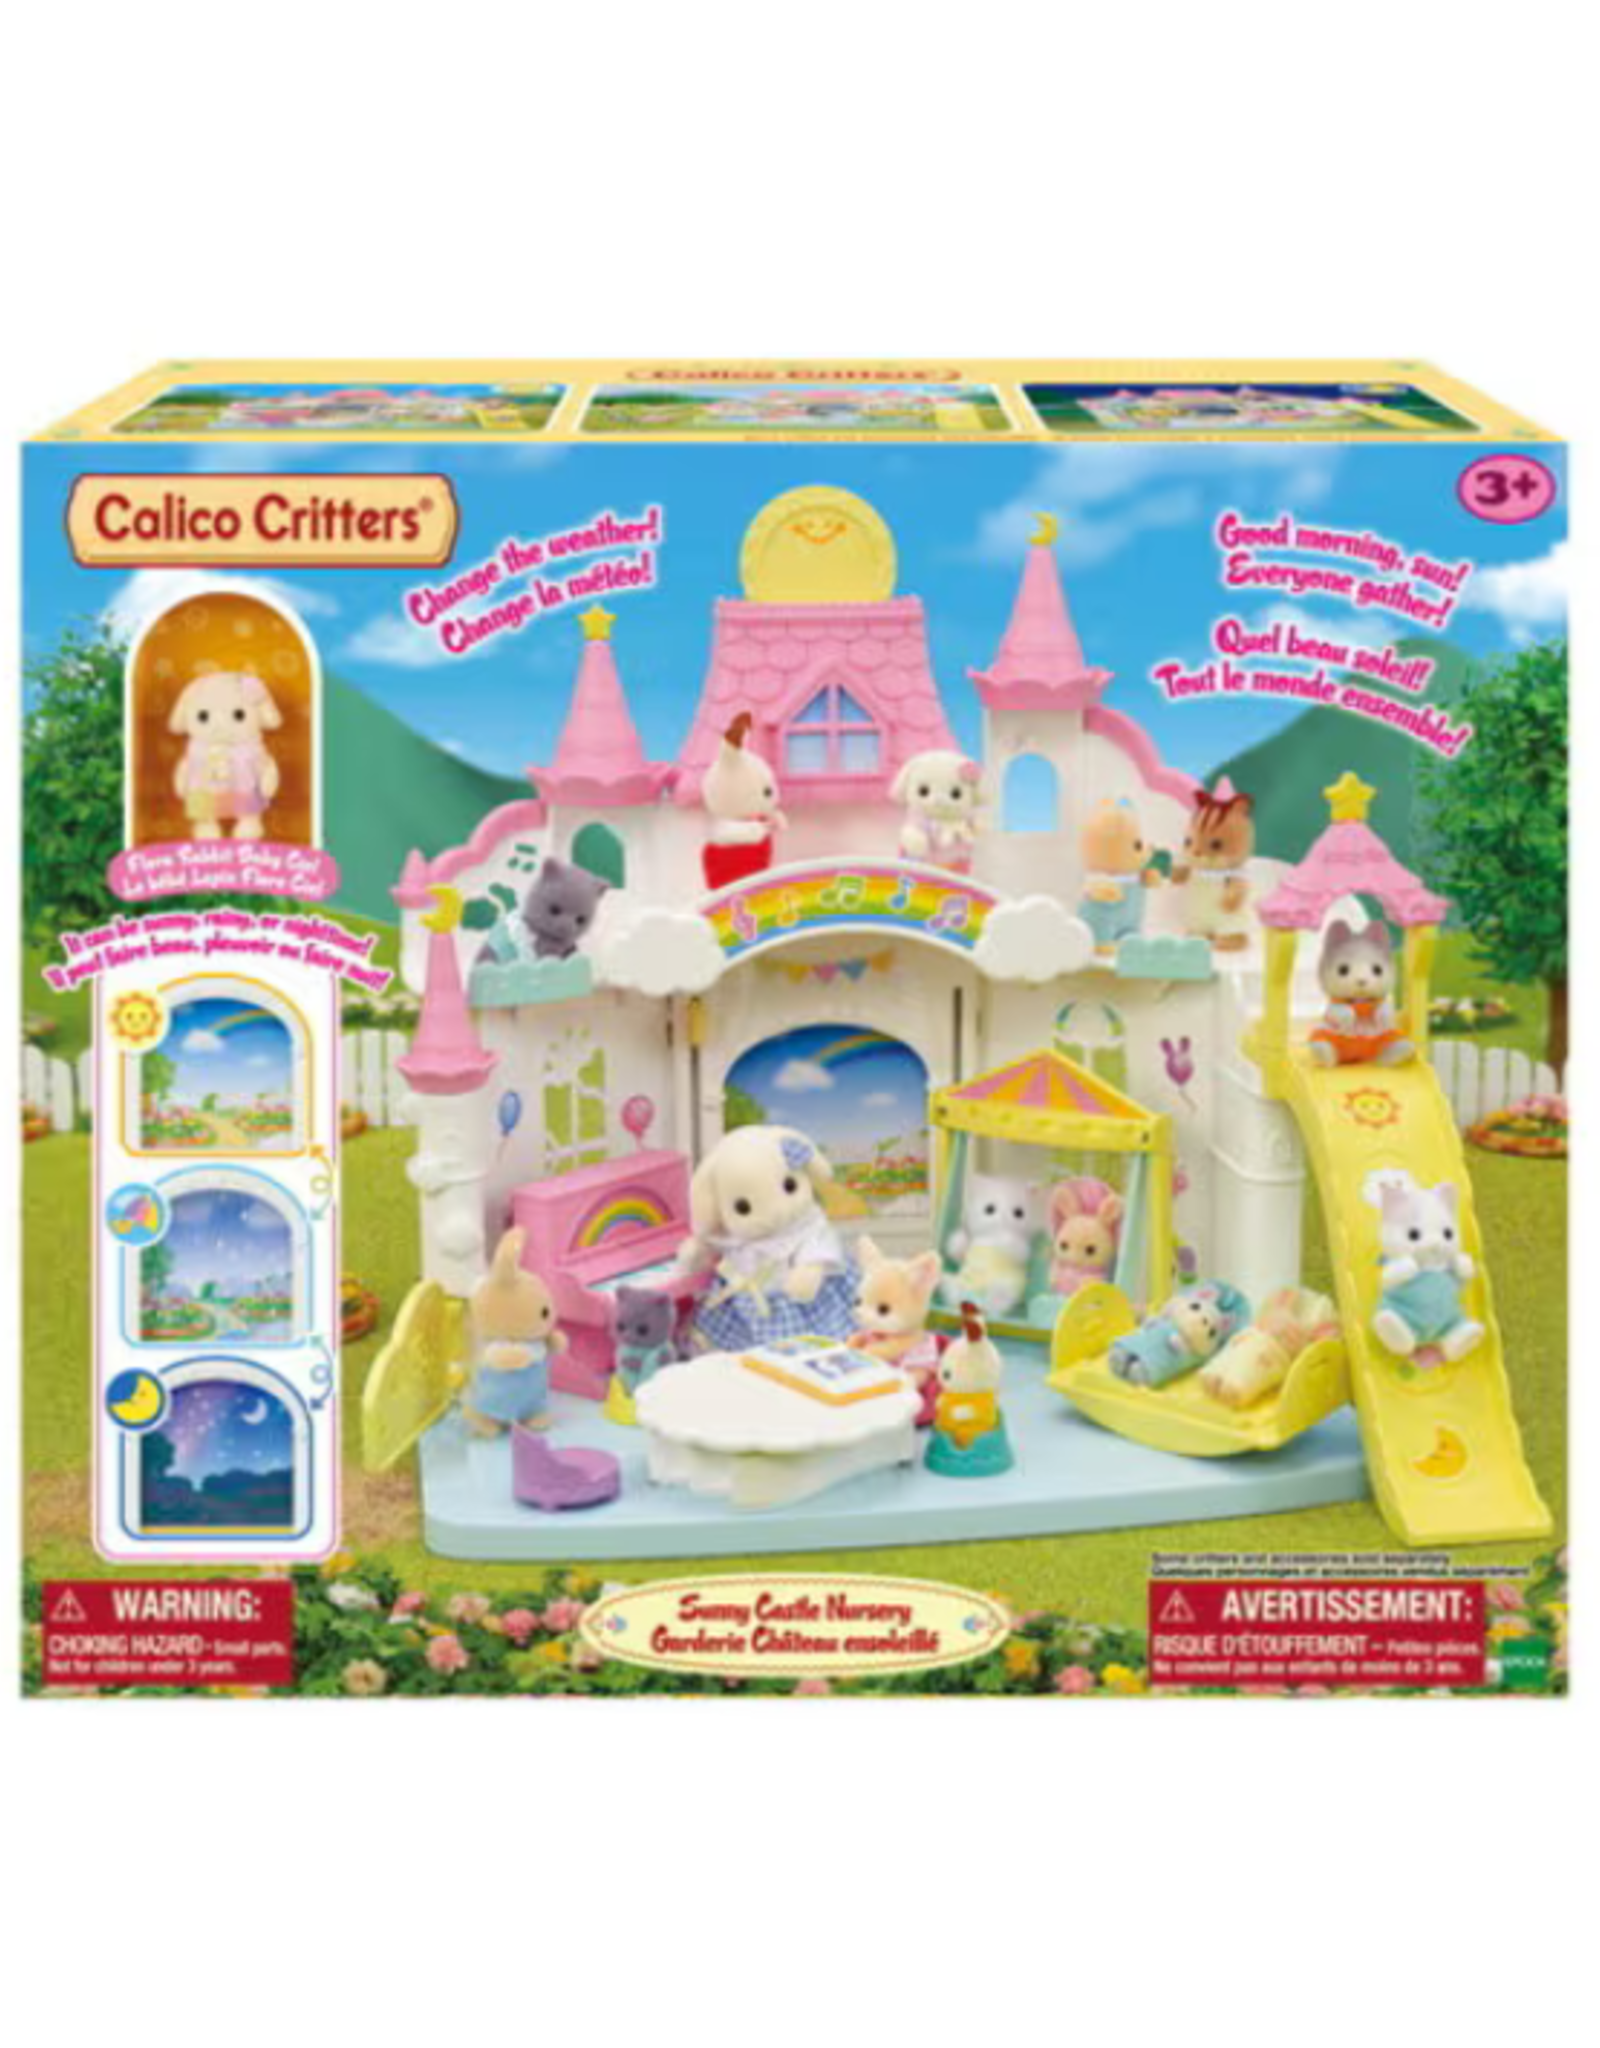 Calico Critters Calico Critters - Sunny Castle Nursery